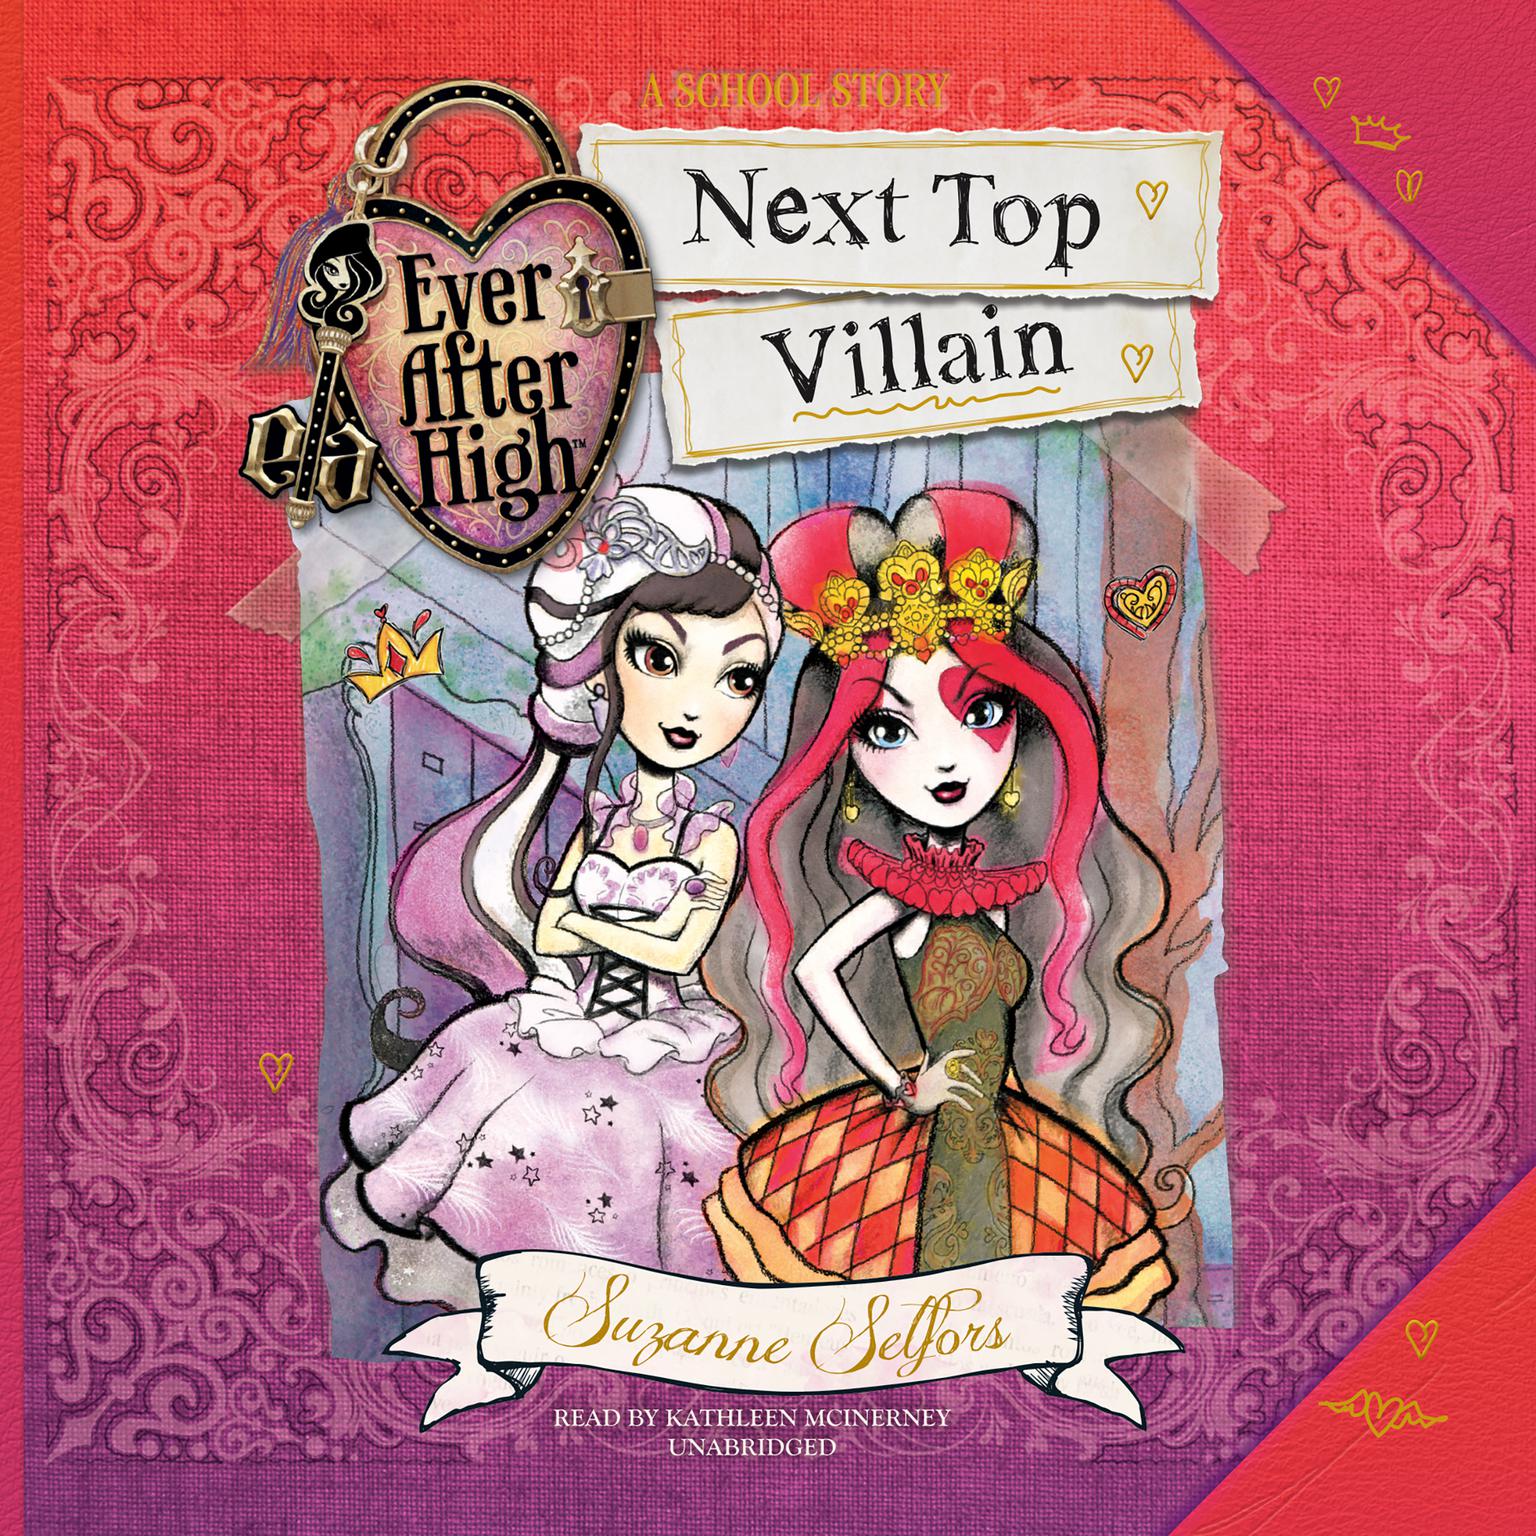 Ever After High: Next Top Villain Audiobook, by Suzanne Selfors